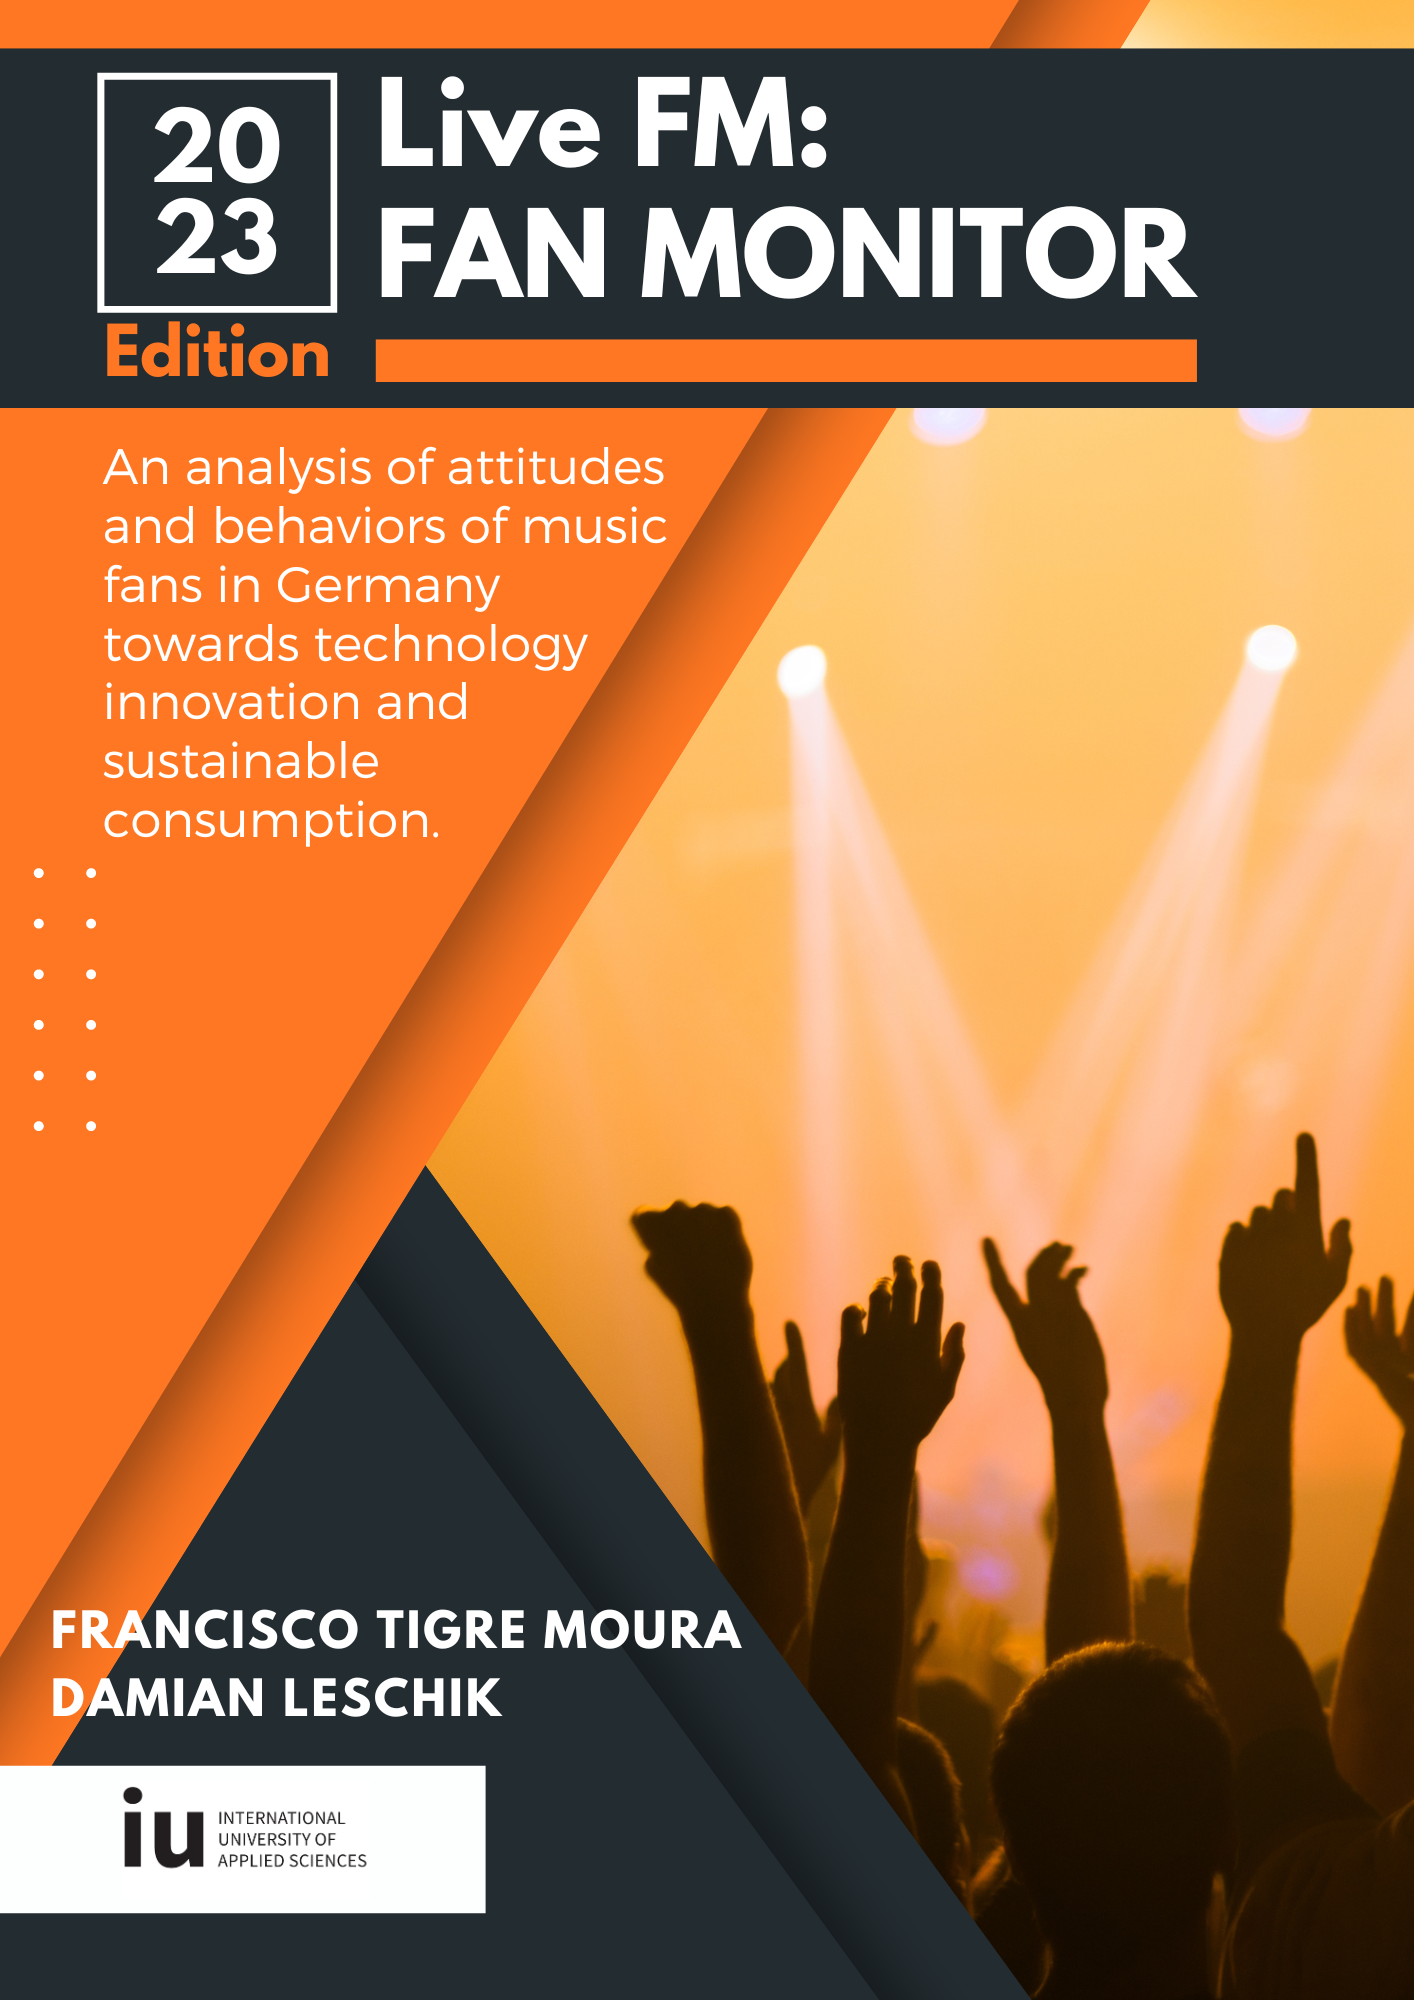 Cover page of the Live FM: Fan Monitor report